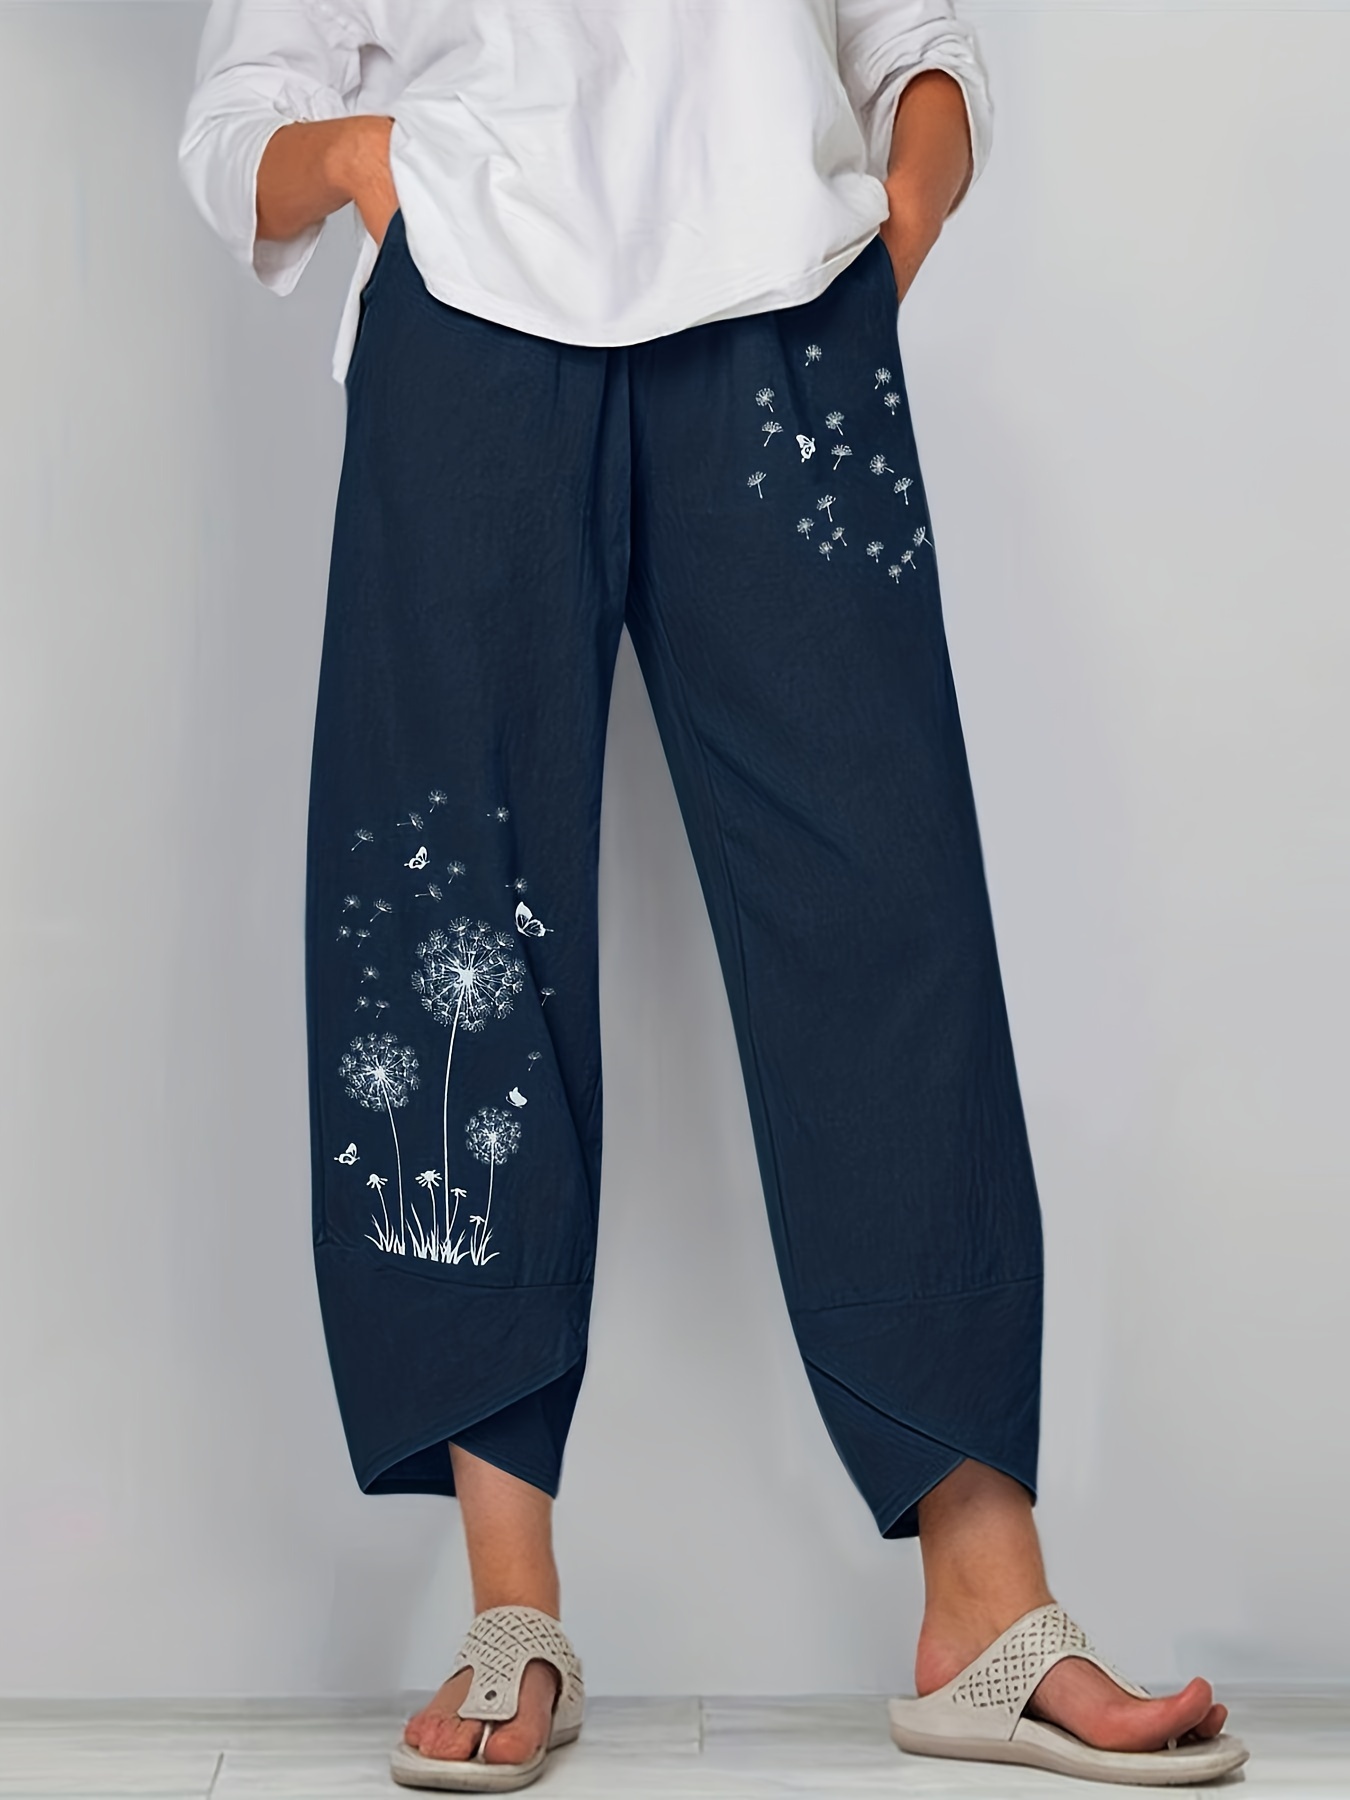 Small Daisy Print Flare Leg Pants, Vacation Pants For Spring & Summer,  Women's Clothing